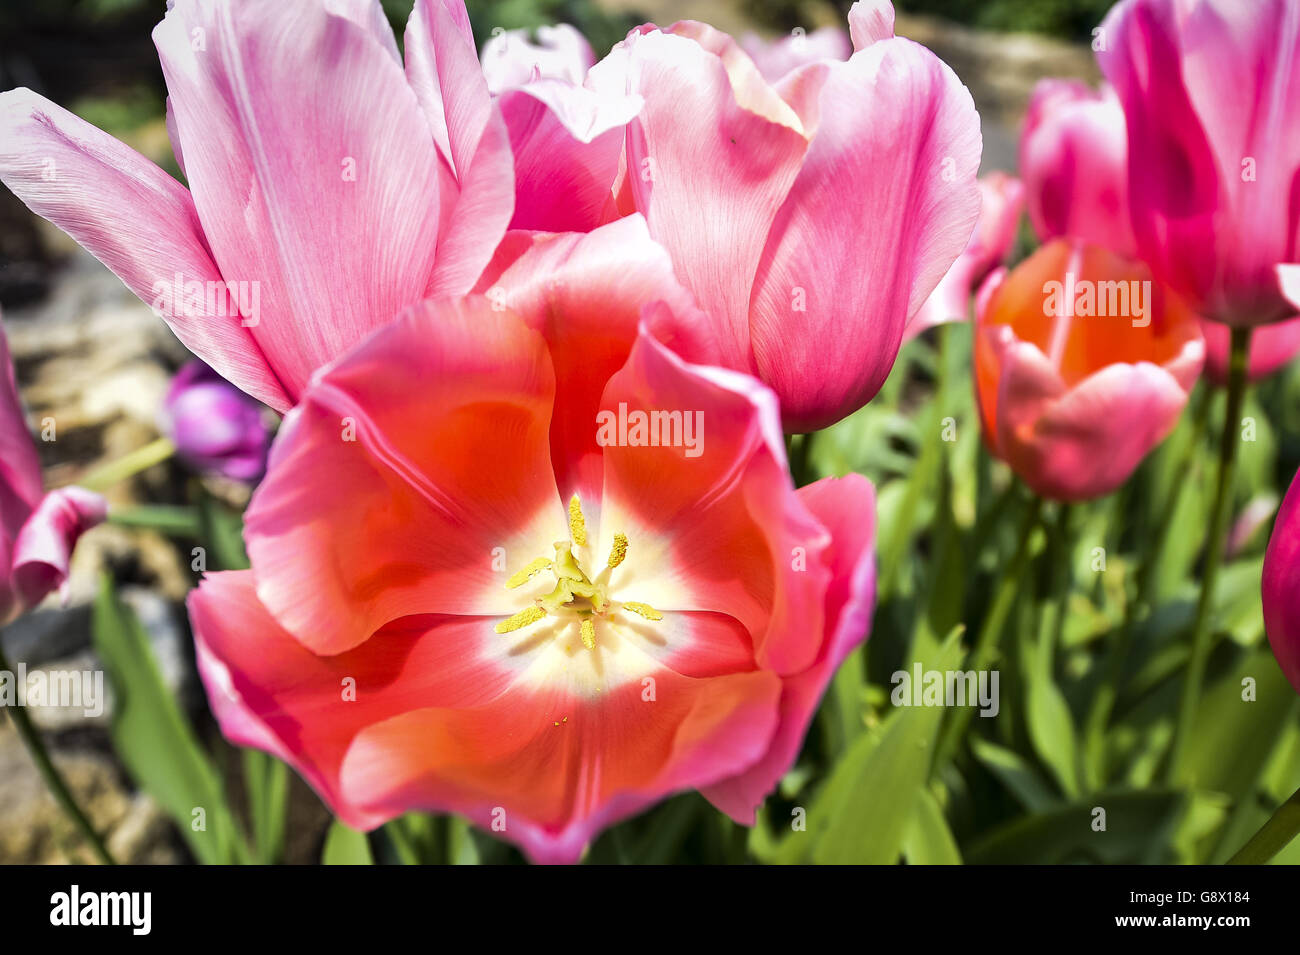 Pink tulips in bloom at the Eden Project in Cornwall, where spring is helped along by the huge biomes creating a Mediterranean-style climate, giving spring flowers even more impact and vibrancy. Stock Photo